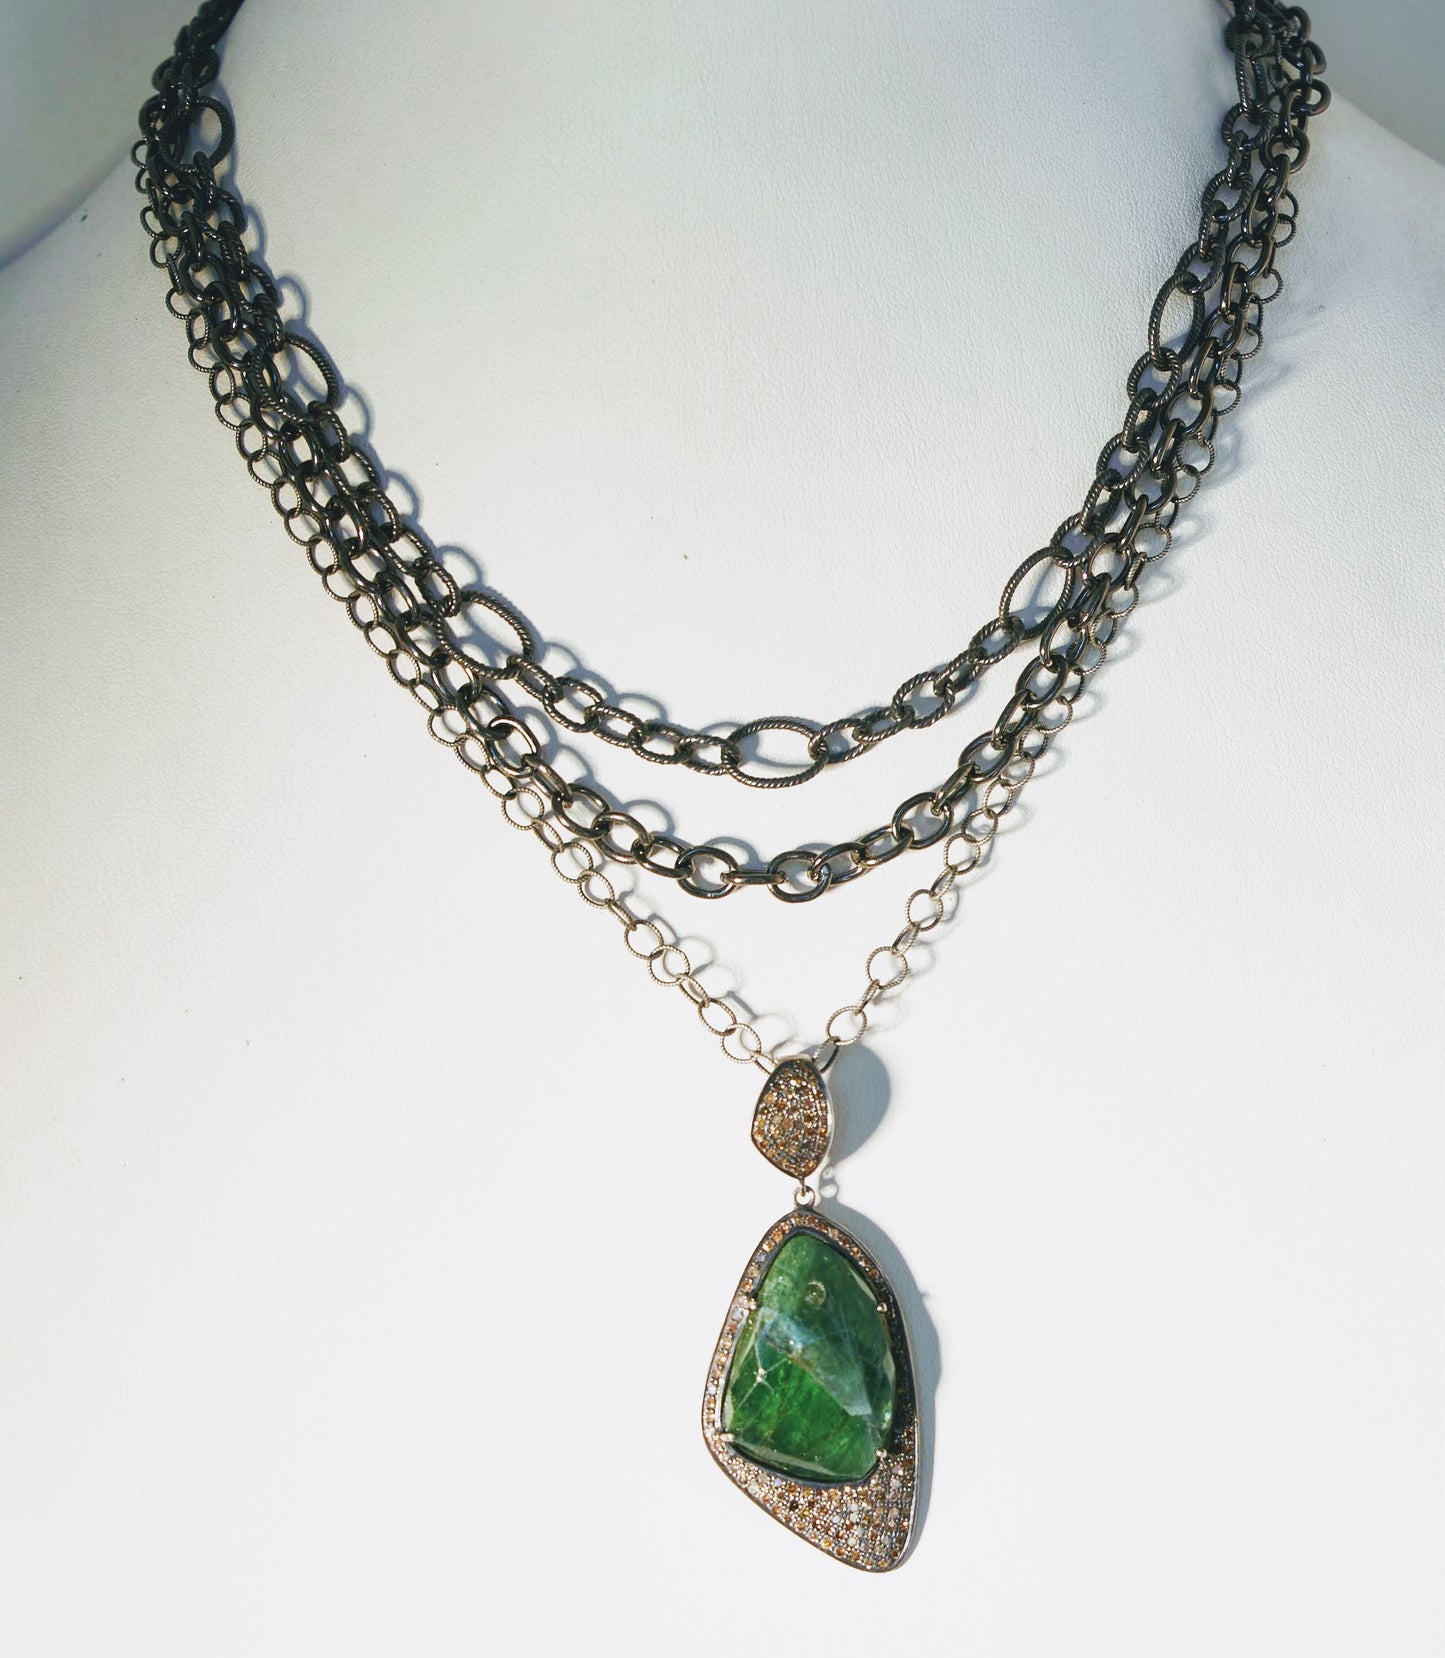 Abstract Emerald and Pave' Diamond Pendant on 3 Gradated Rhodium Chains 17" - 19"